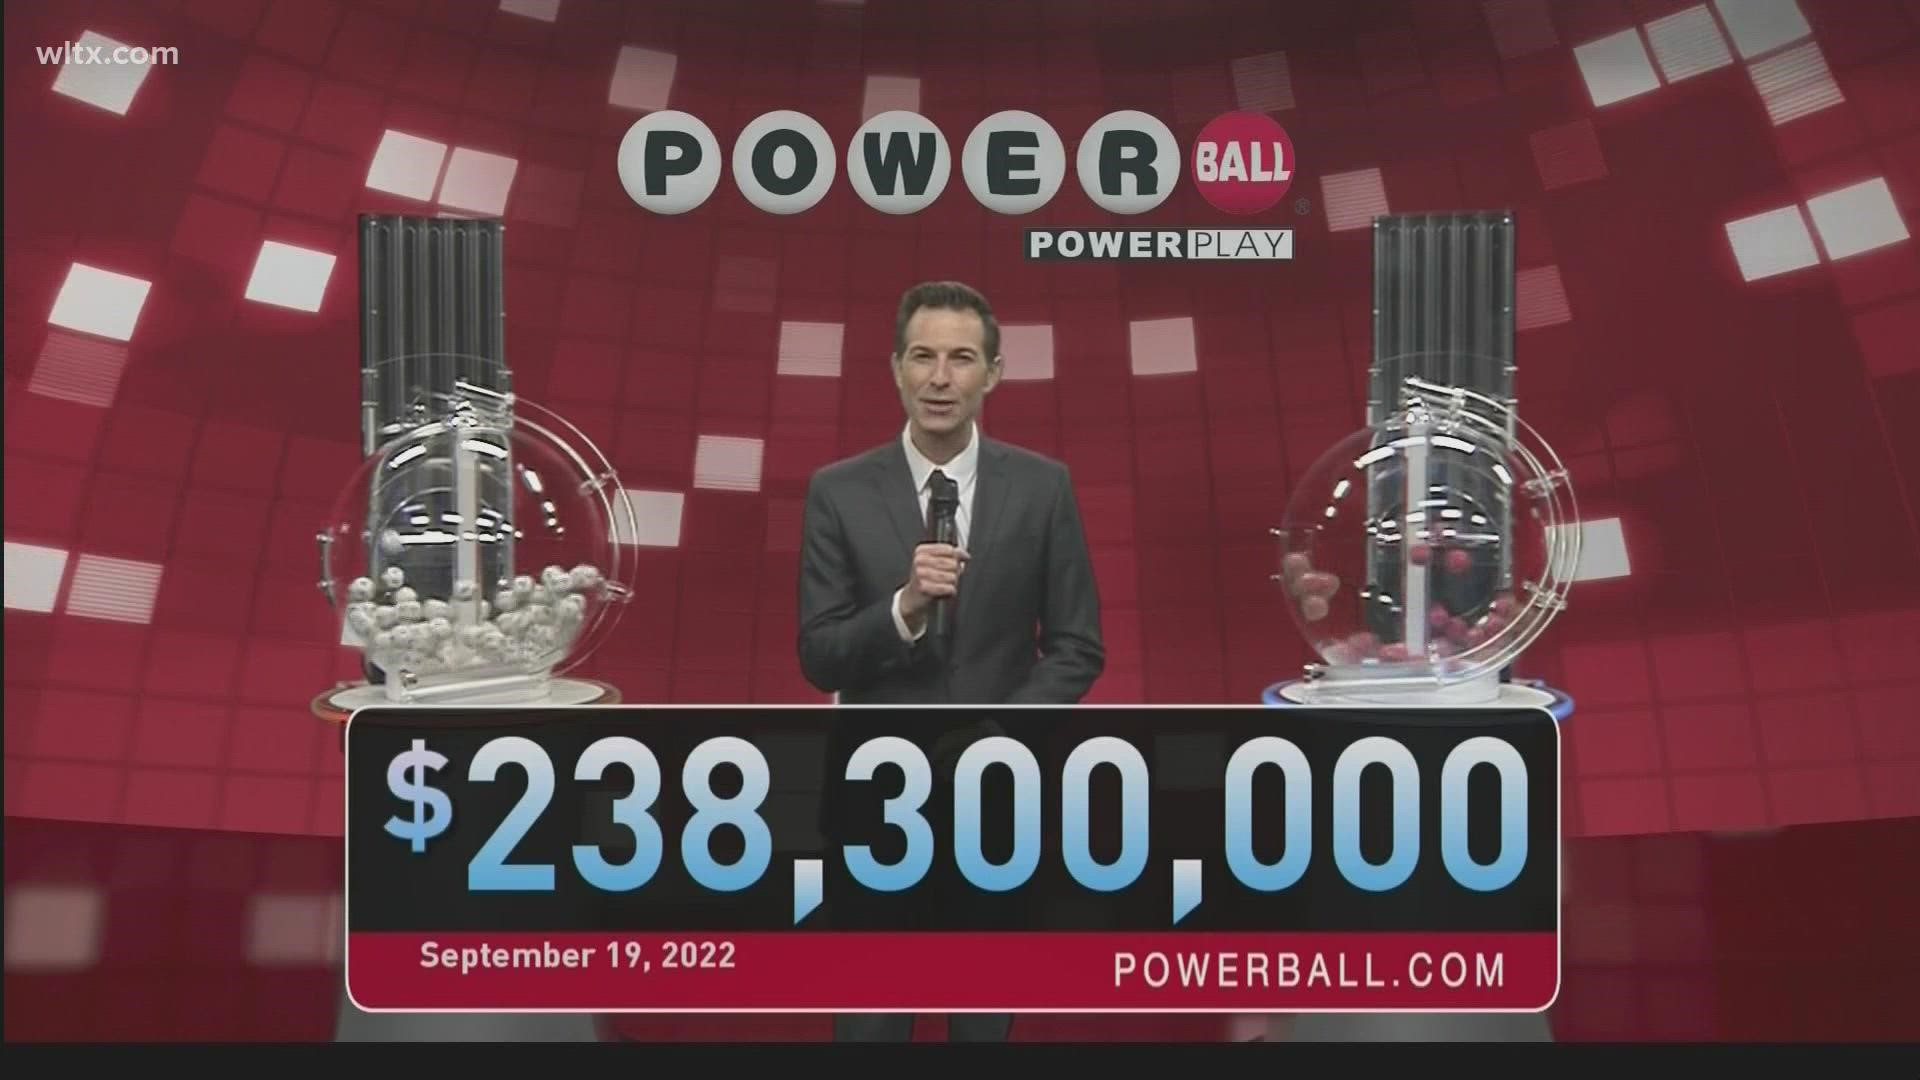 Here are the winning Powerball numbers for Monday, September 19, 2022.